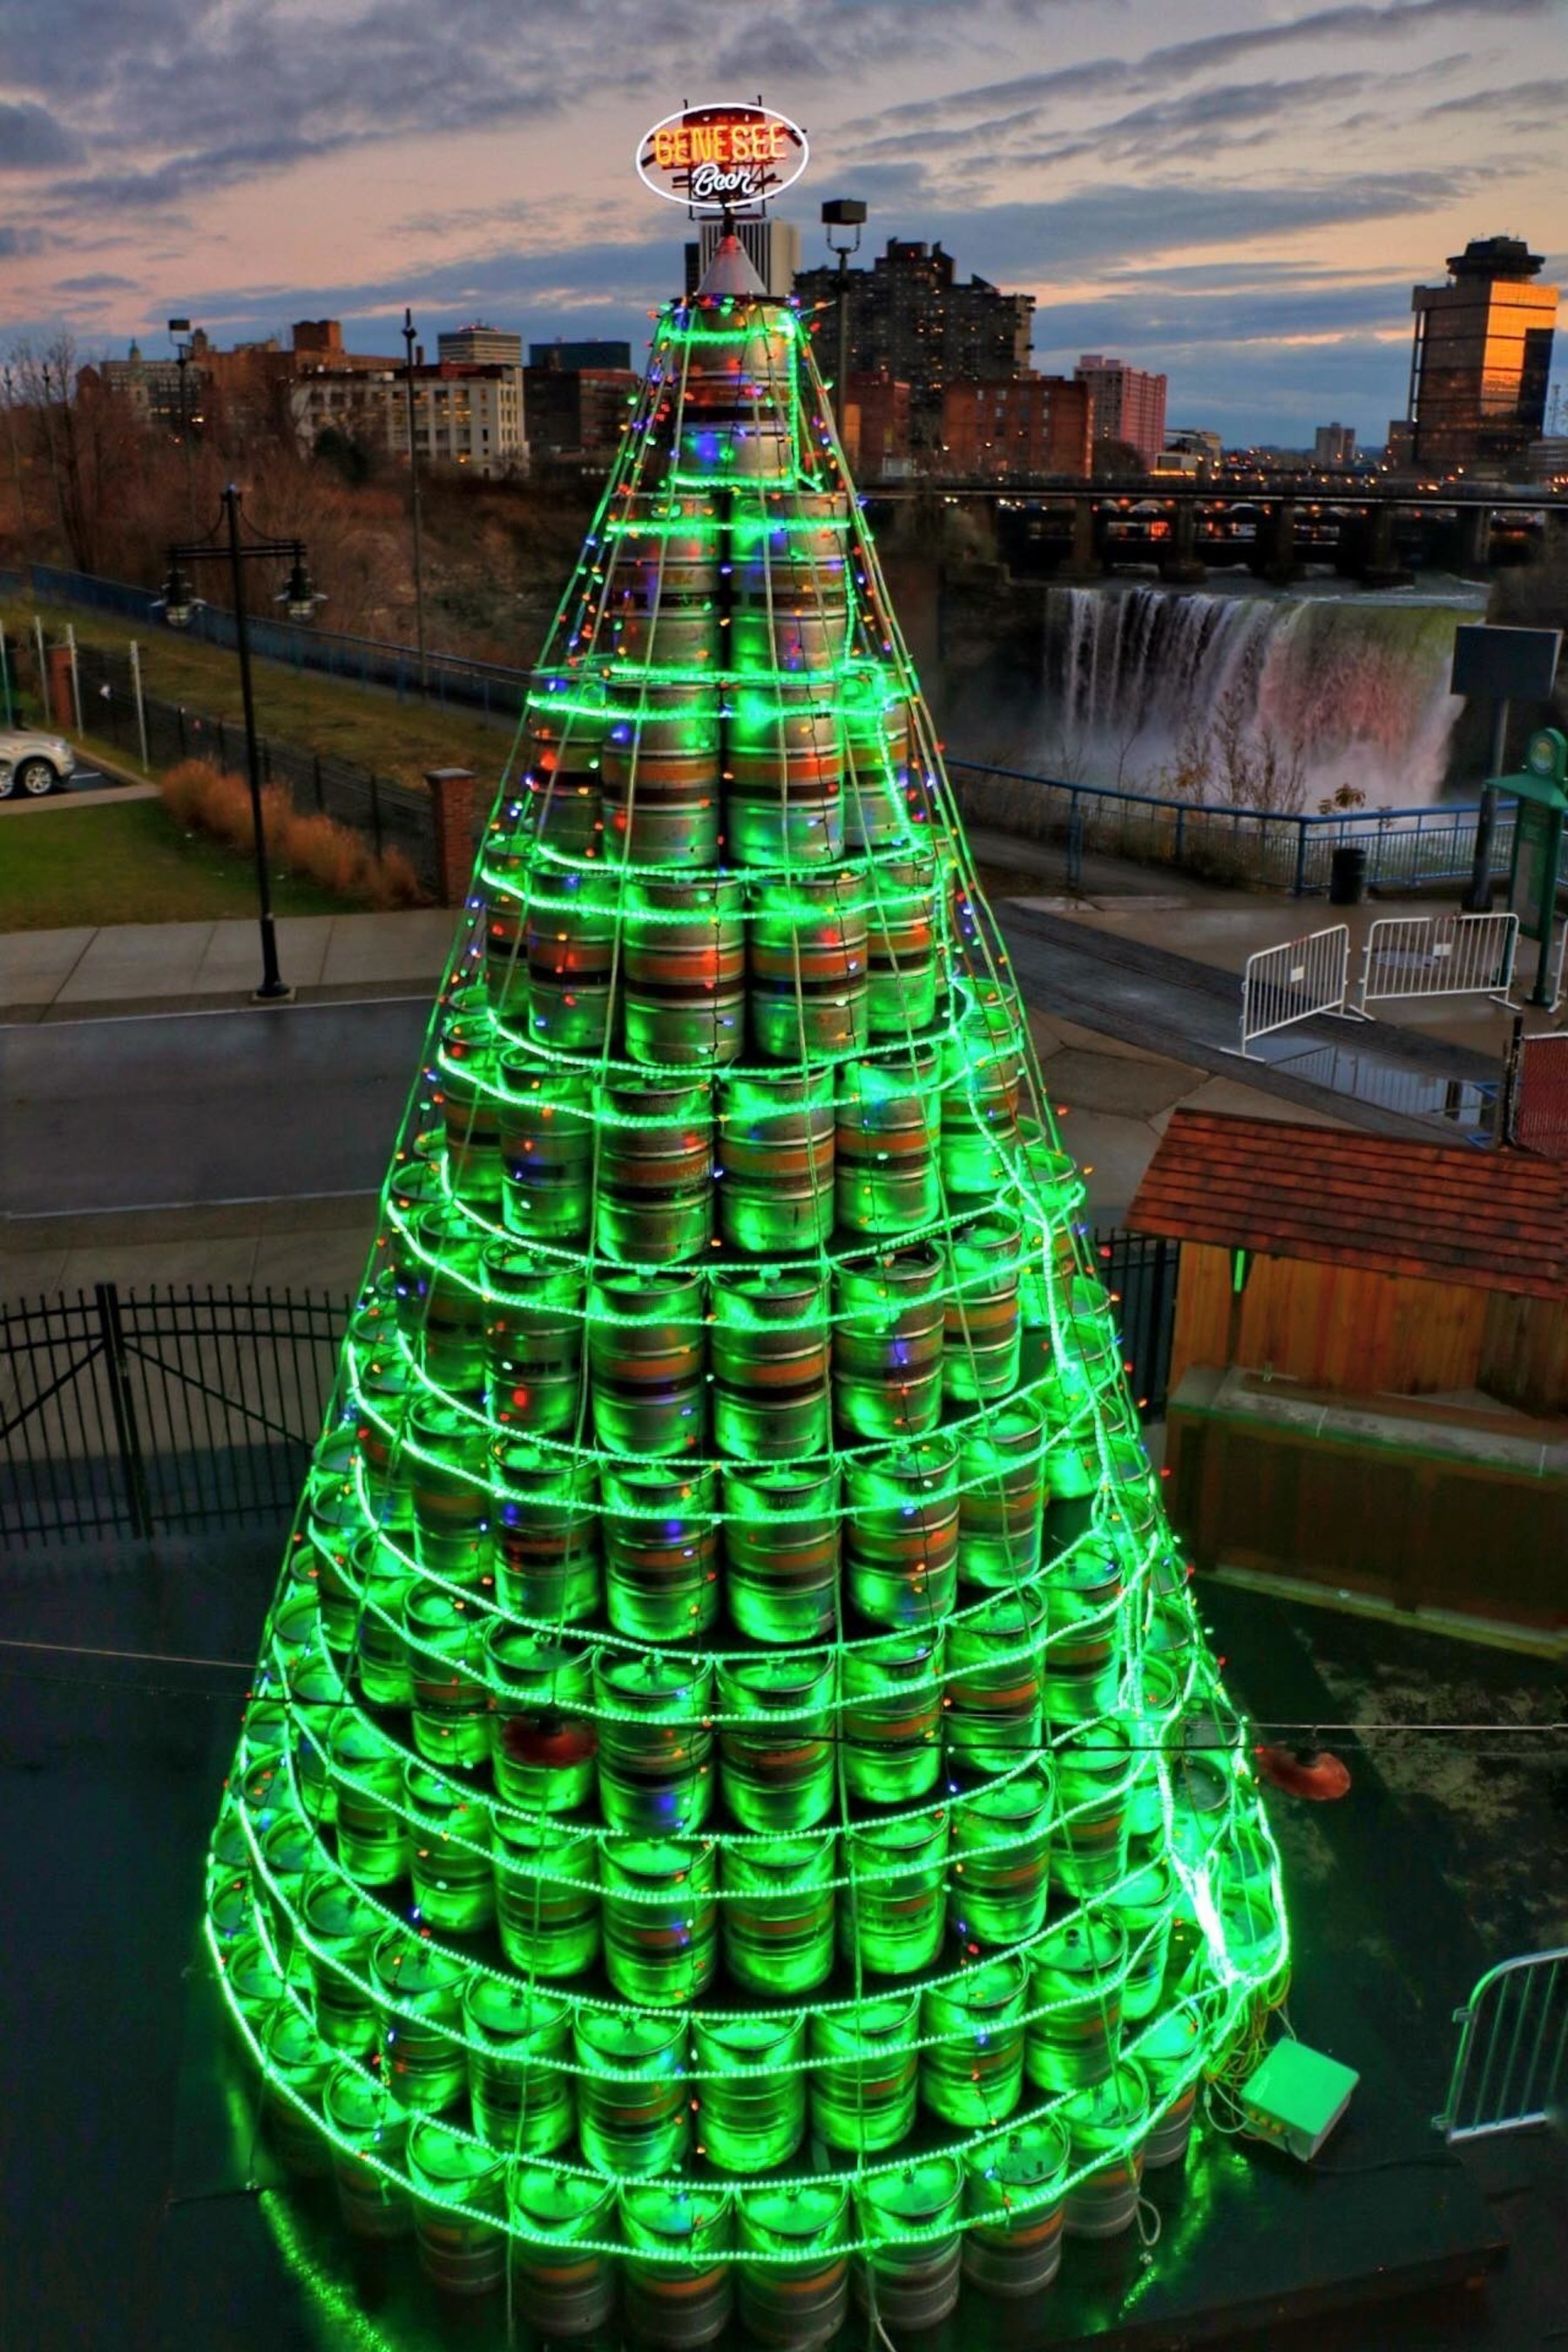 The Genesee Brewery, New York State's oldest brewery, kicked off the holiday season by unveiling a two-story Christmas tree, constructed of 428 empty beer kegs, outside its Genesee Brew House in Rochester, New York. Photo Credit: John Kucko